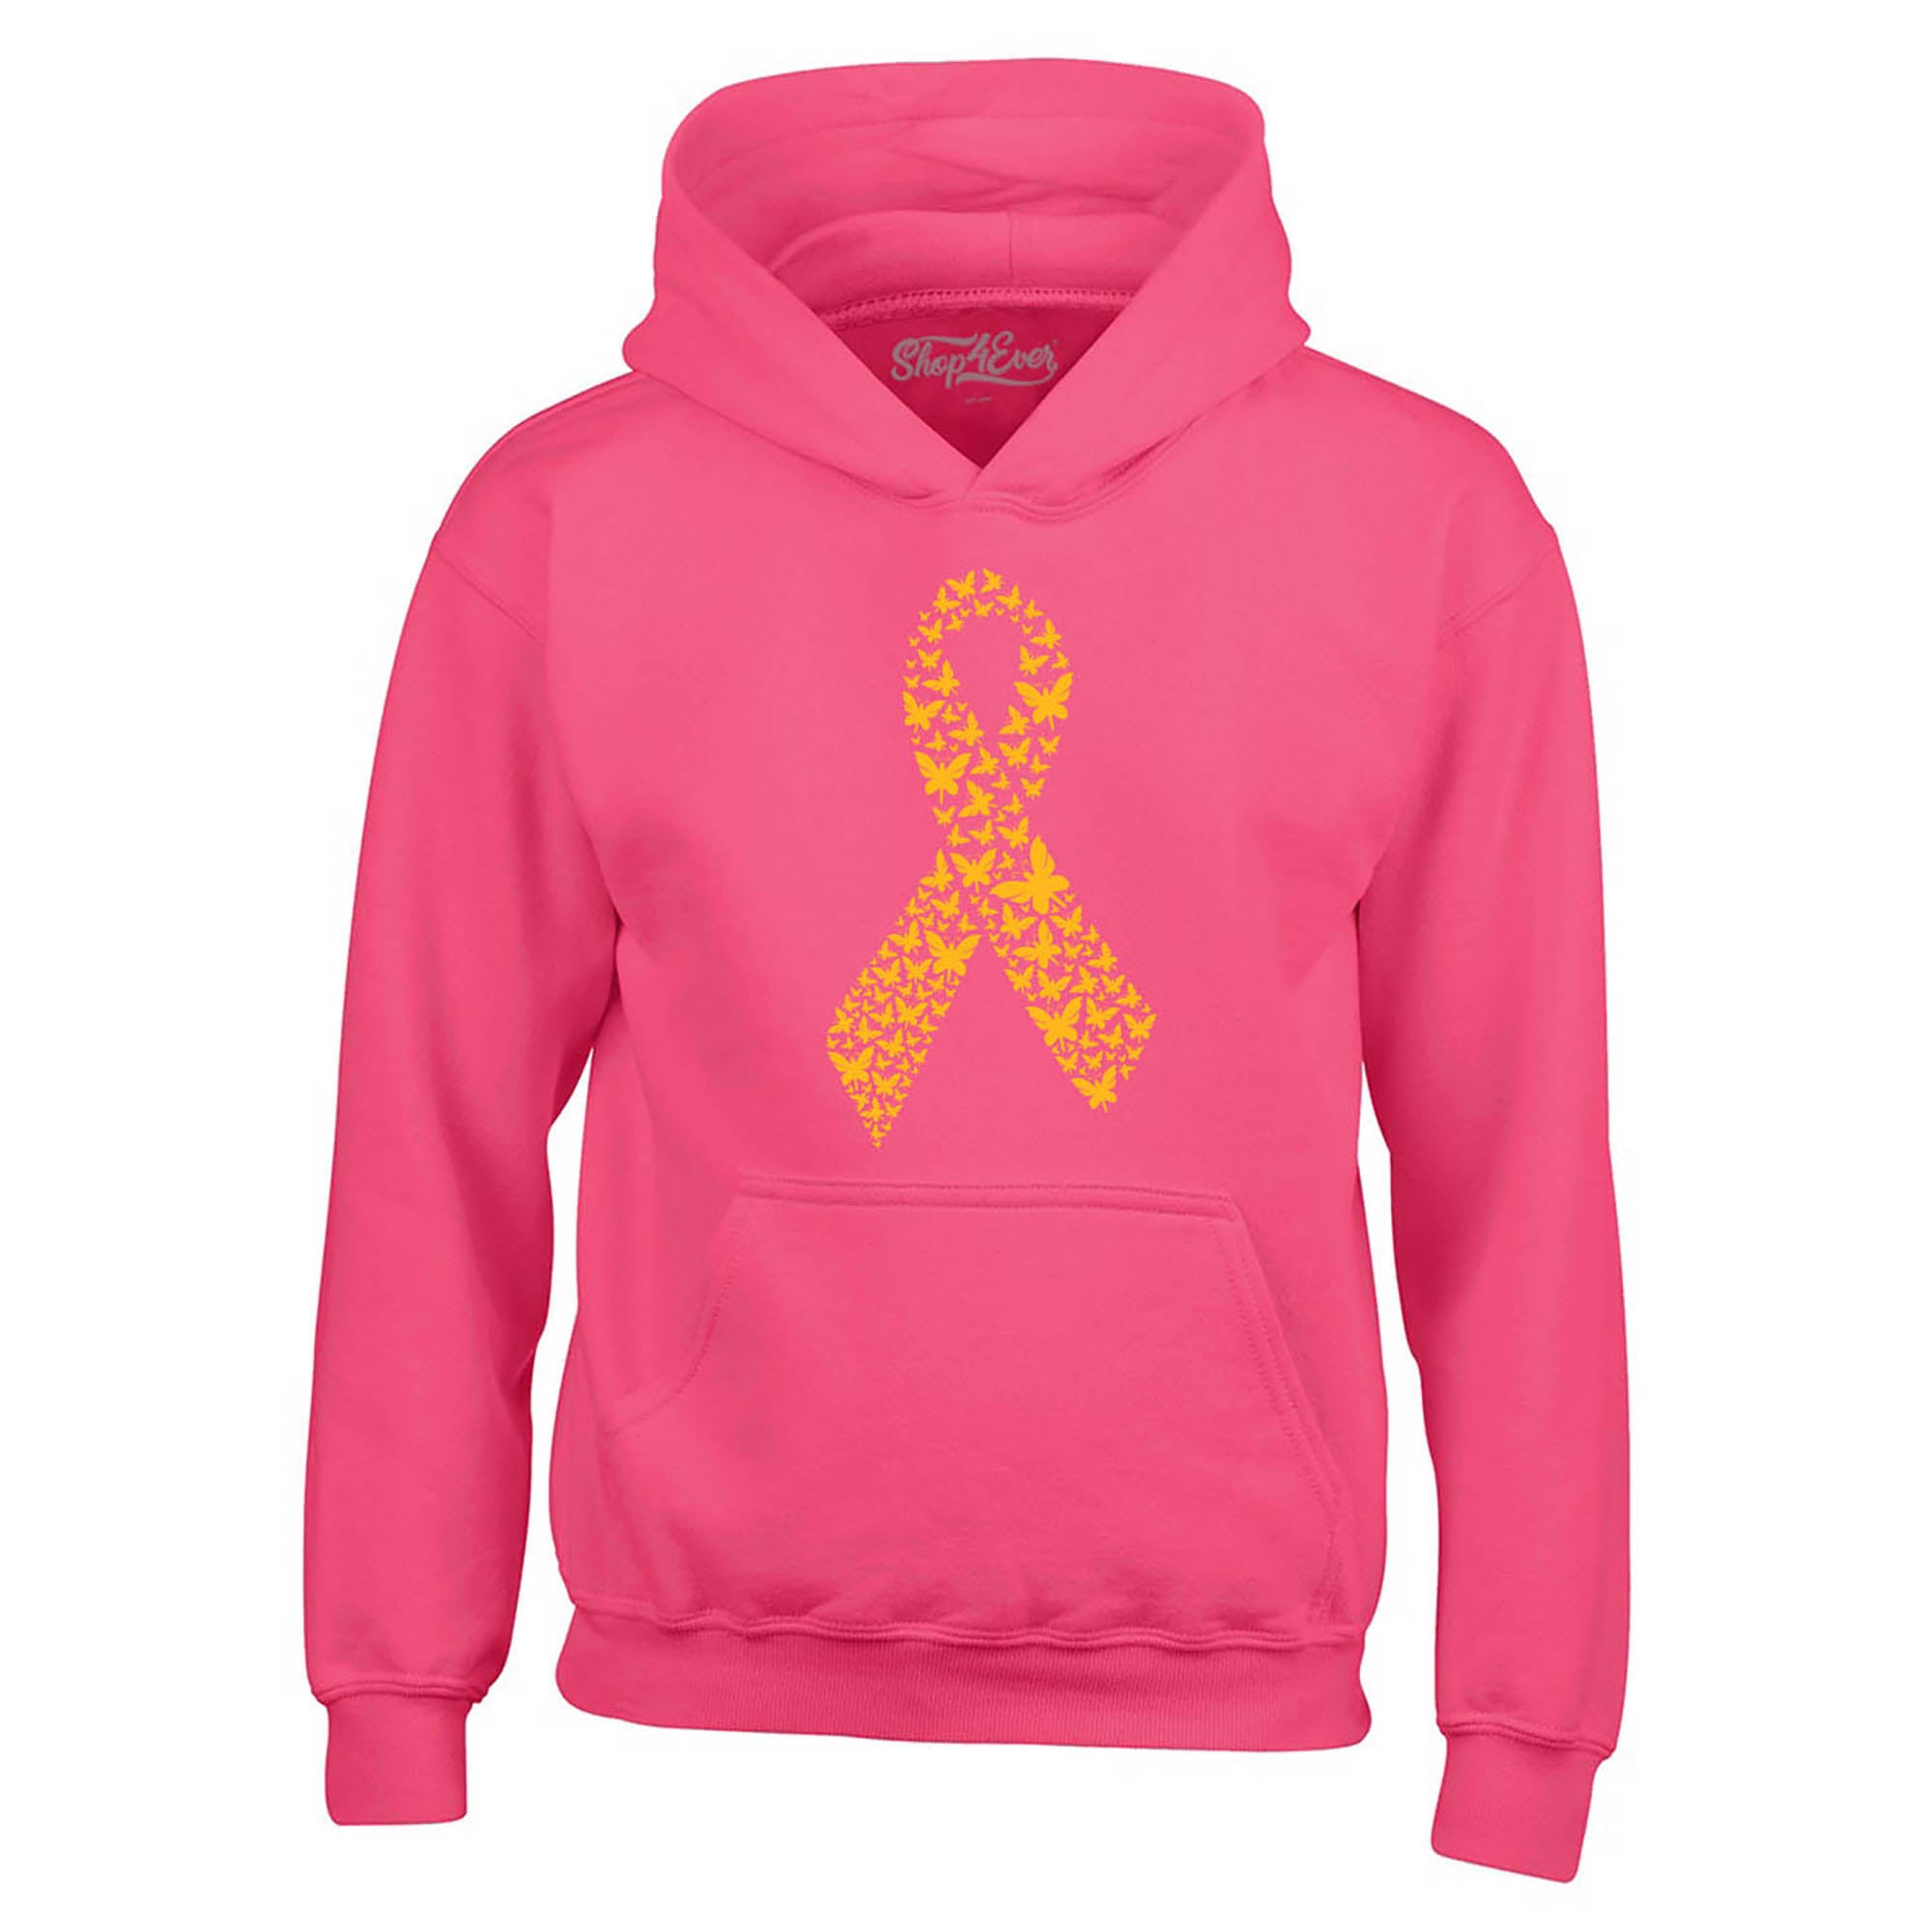 Gold Butterfly Ribbon Childhood Cancer Awareness Hoodie Sweatshirts